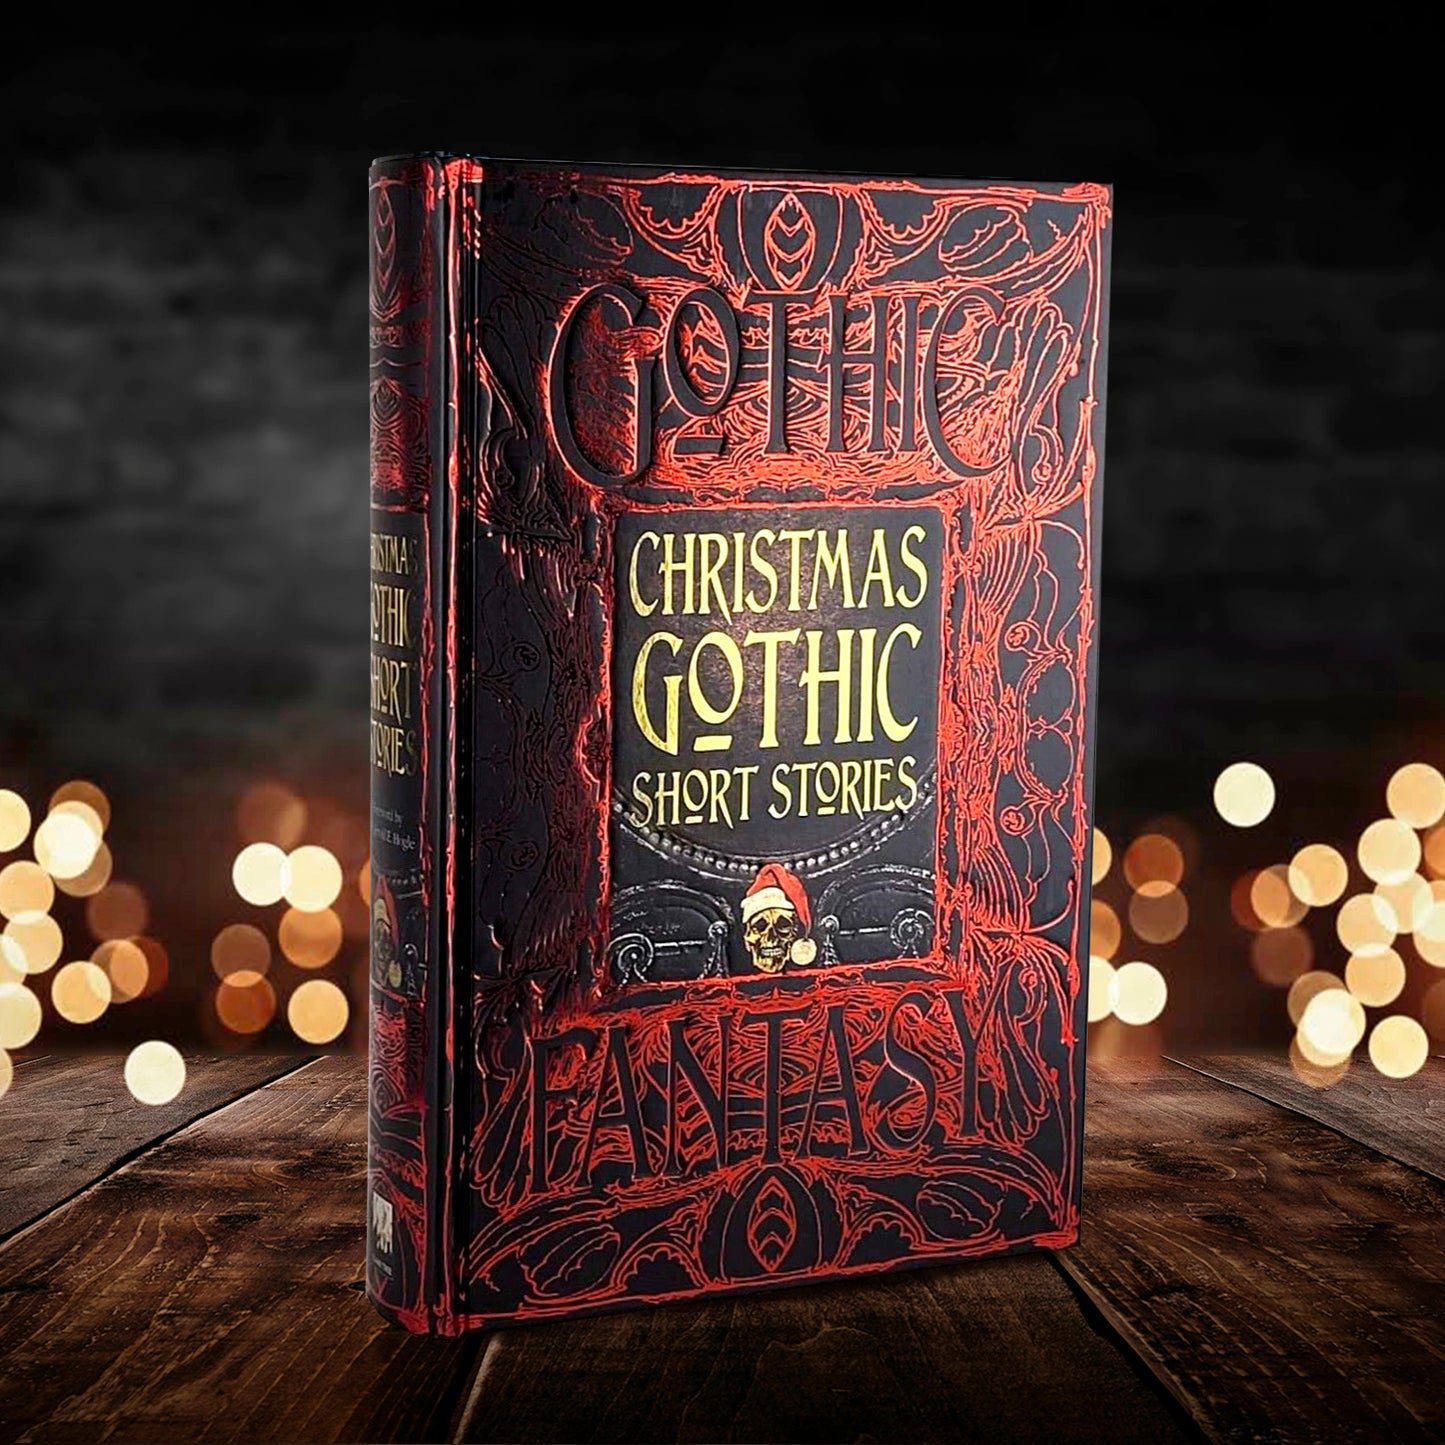 Load image into Gallery viewer, A red and black book on a wooden floor. The background of the cover depicts a gothic floral pattern in red against black, with the words gothic fantasy spelled out in the pattern. In the center is a gray stone tablet, with a skull at the bottom wearing a Santa Claus hat. Yellow text above the skull says Christmas Gothic Short Stories. Behind the book are tiny white lights, against a smoky gray background.
